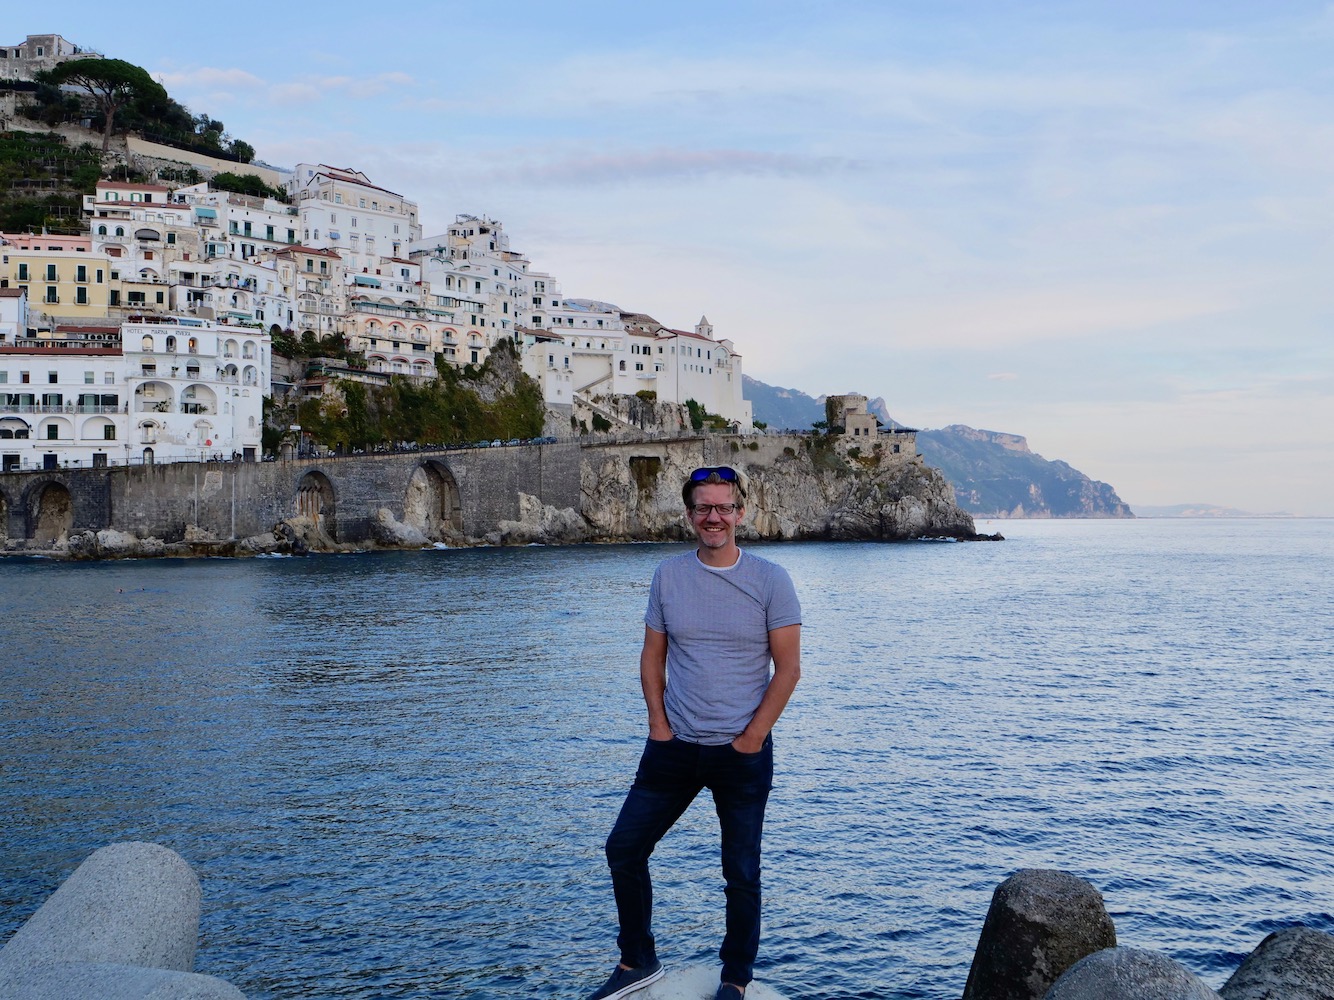  The water front in the town of Amalfi. 